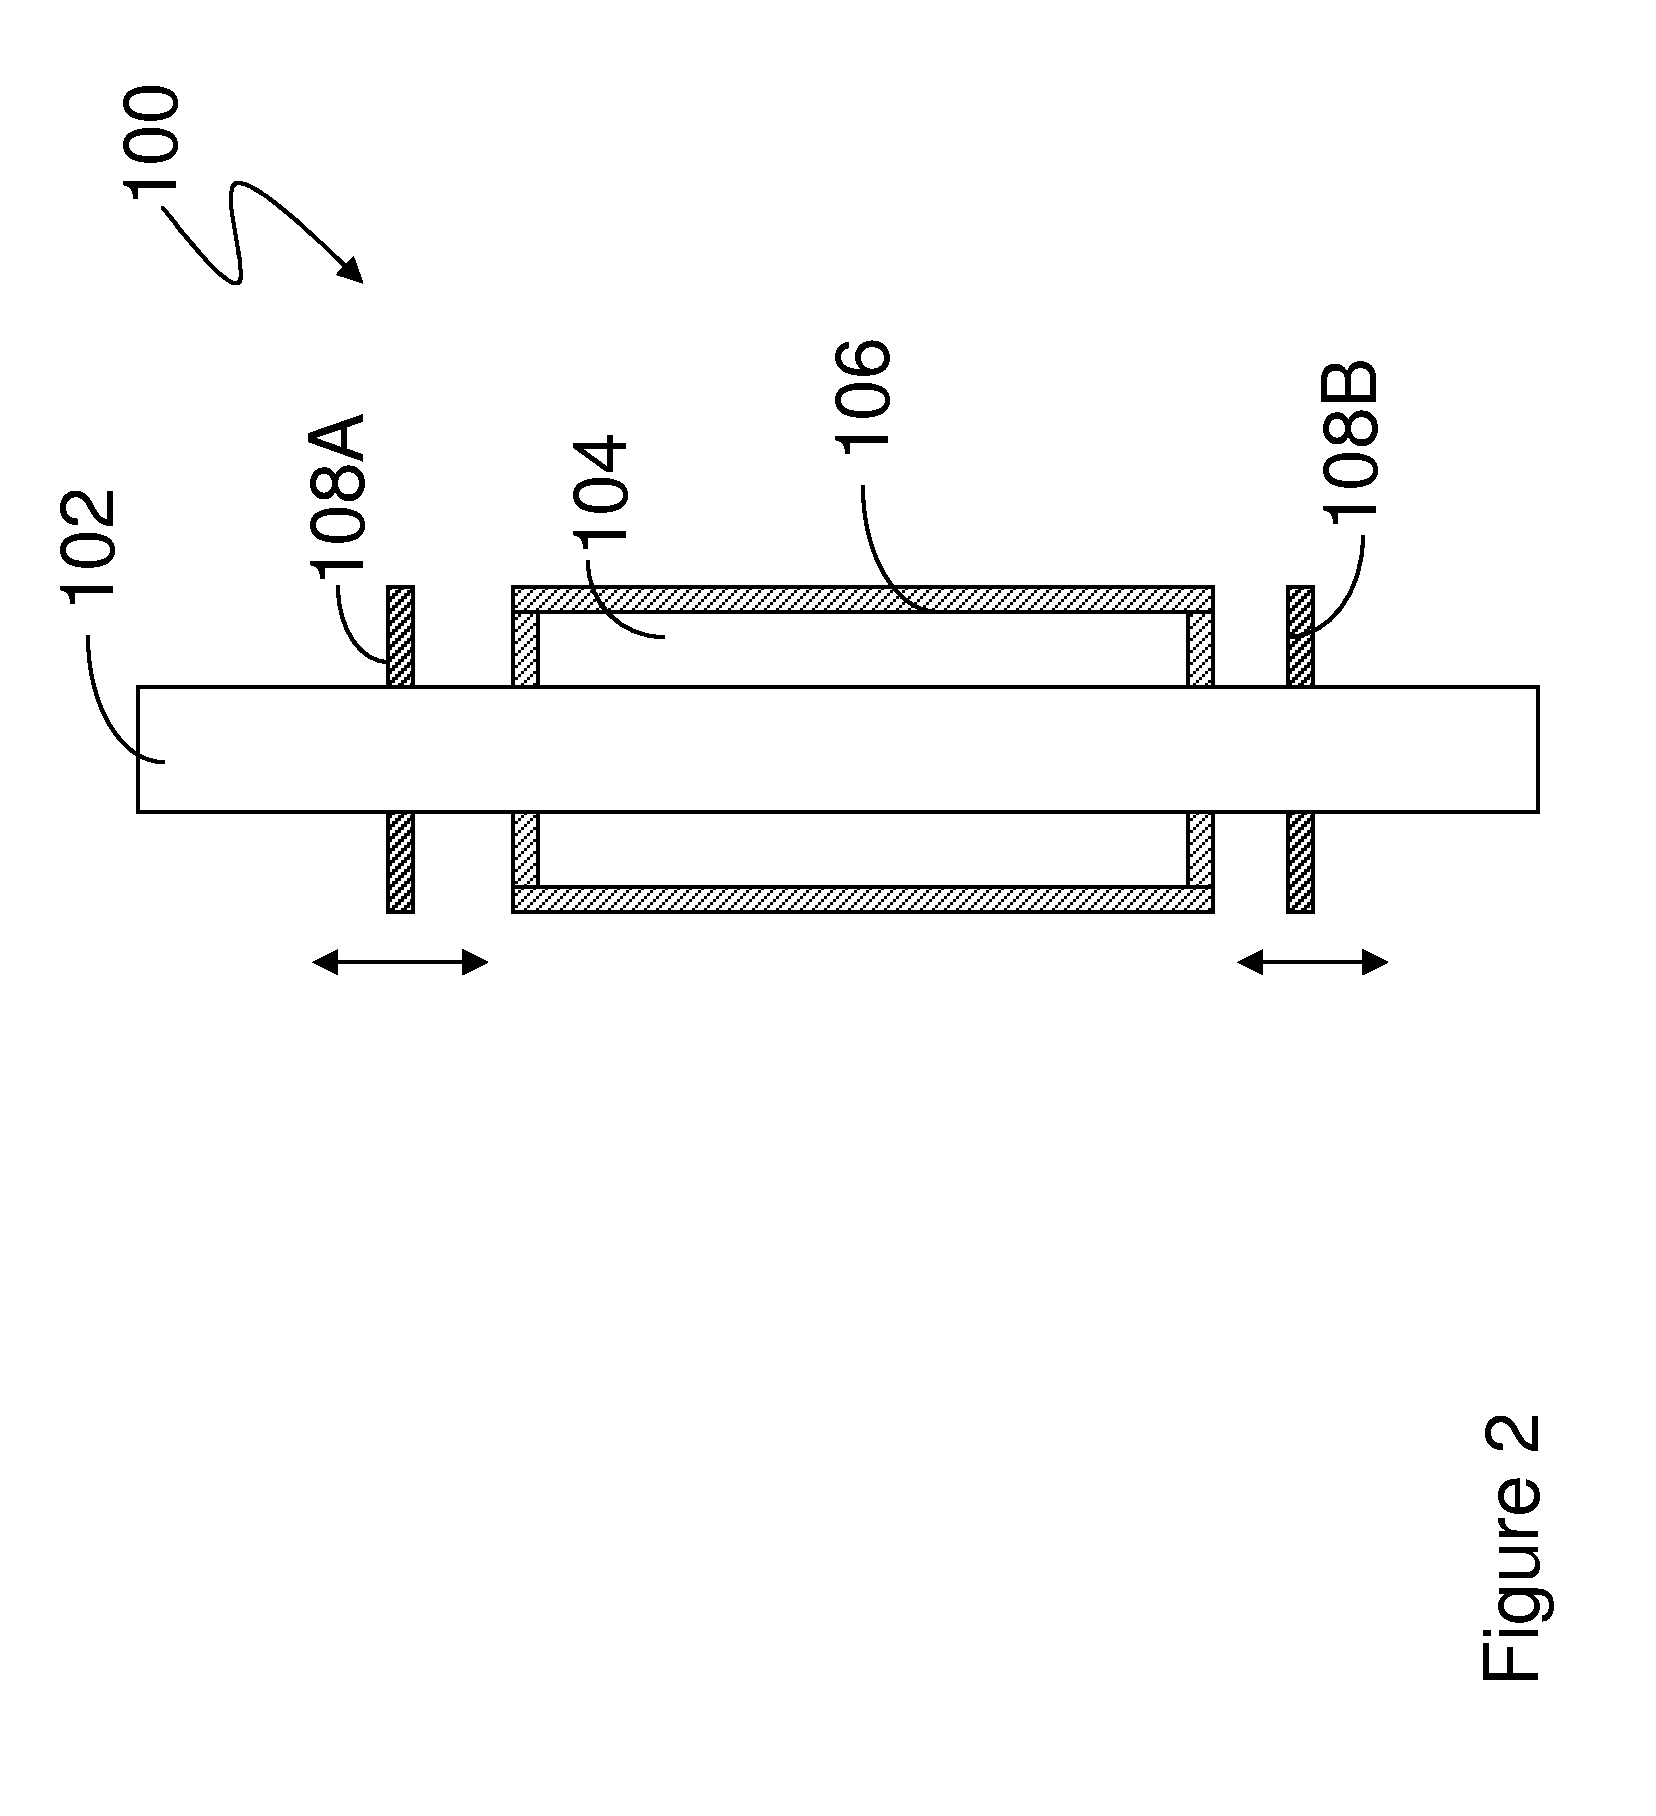 Sealing system, method of manufacture thereof and articles comprising the same